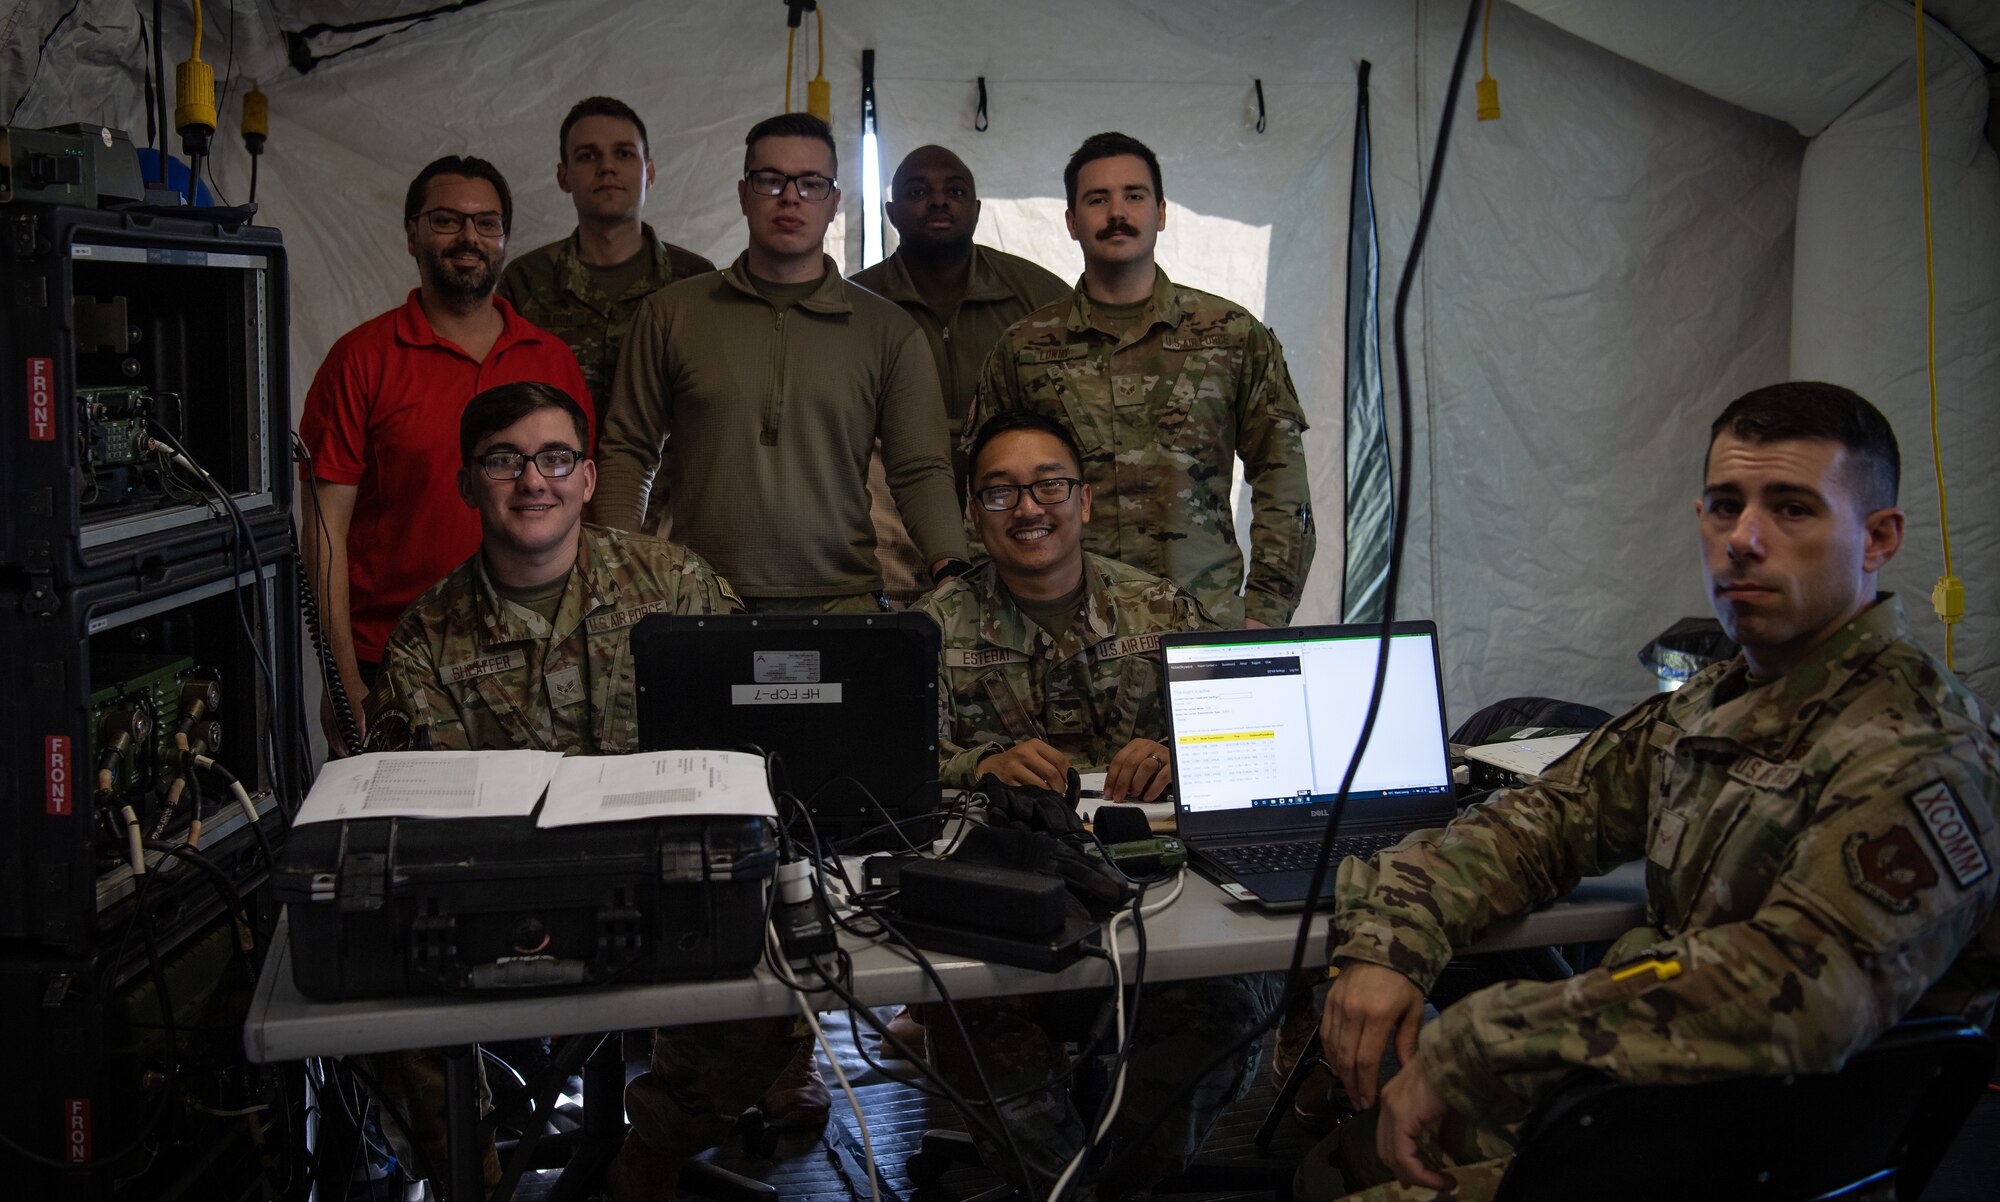 U.S. Air Force Airmen assigned to the 1st Combat Communications Squadron  participate in Noble Skywave at U.S. Army Garrison Baumholder, Germany, Germany, Oct. 26, 2022.  Noble Skywave is a contest set in an environment where the participants must use high-frequency radio technology to contact other military unit radio stations around the globe and whoever contacts the most takes first place. (U.S. Air Force photo by Airman 1st Class Jared Lovett)